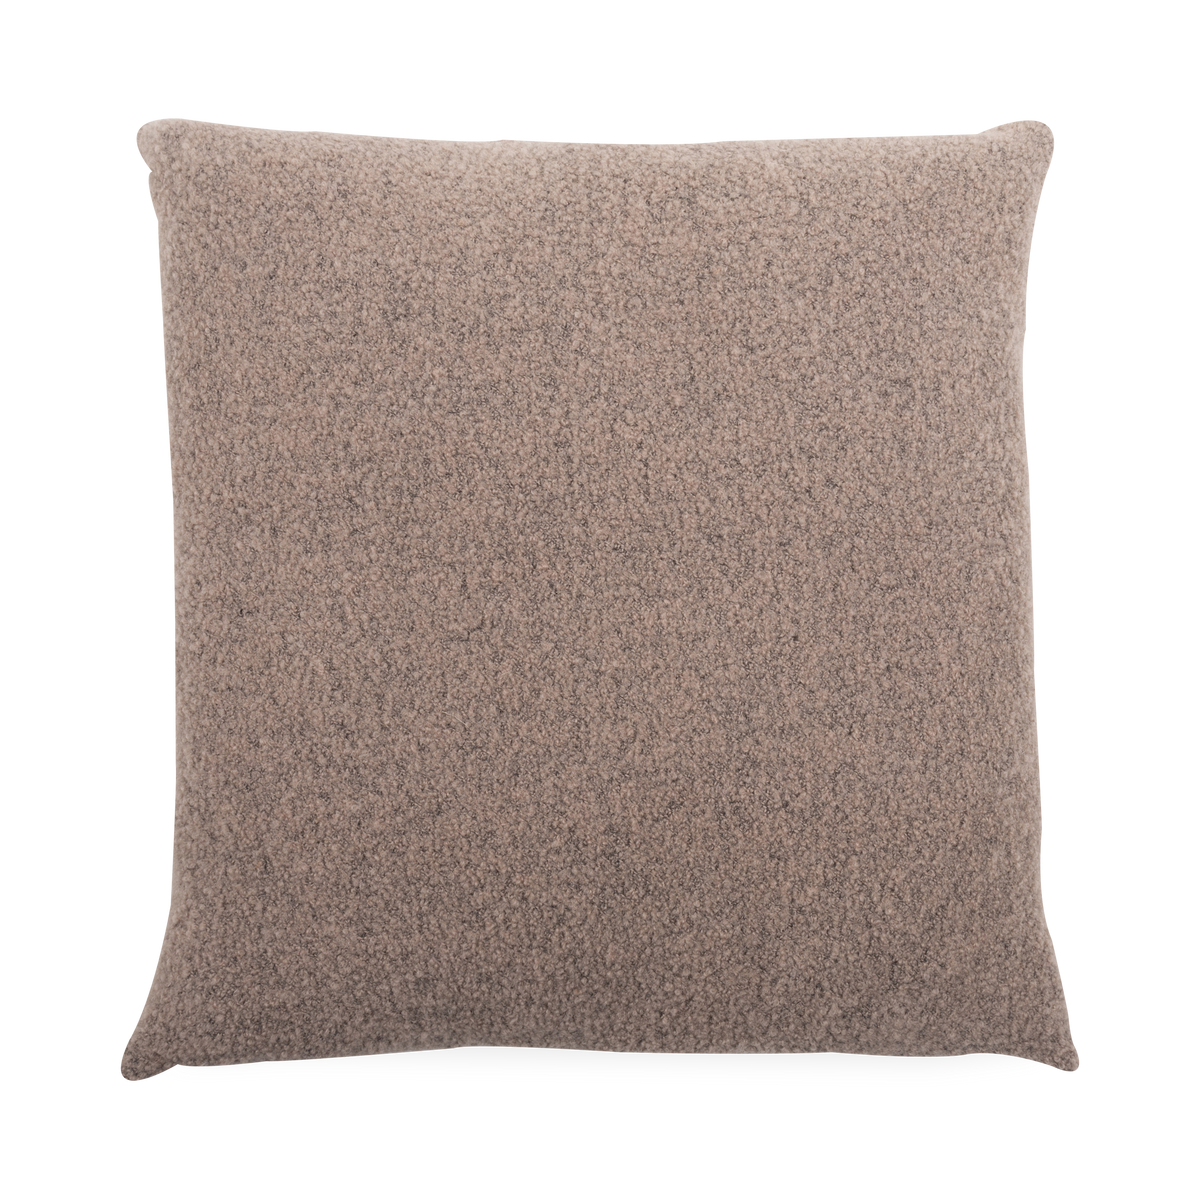 Woven exclusively with wool from New Zealand, which is known for its superior quality and beautiful luster, the Wool Boucle Pillow provides a layer of textural appeal with its bouc